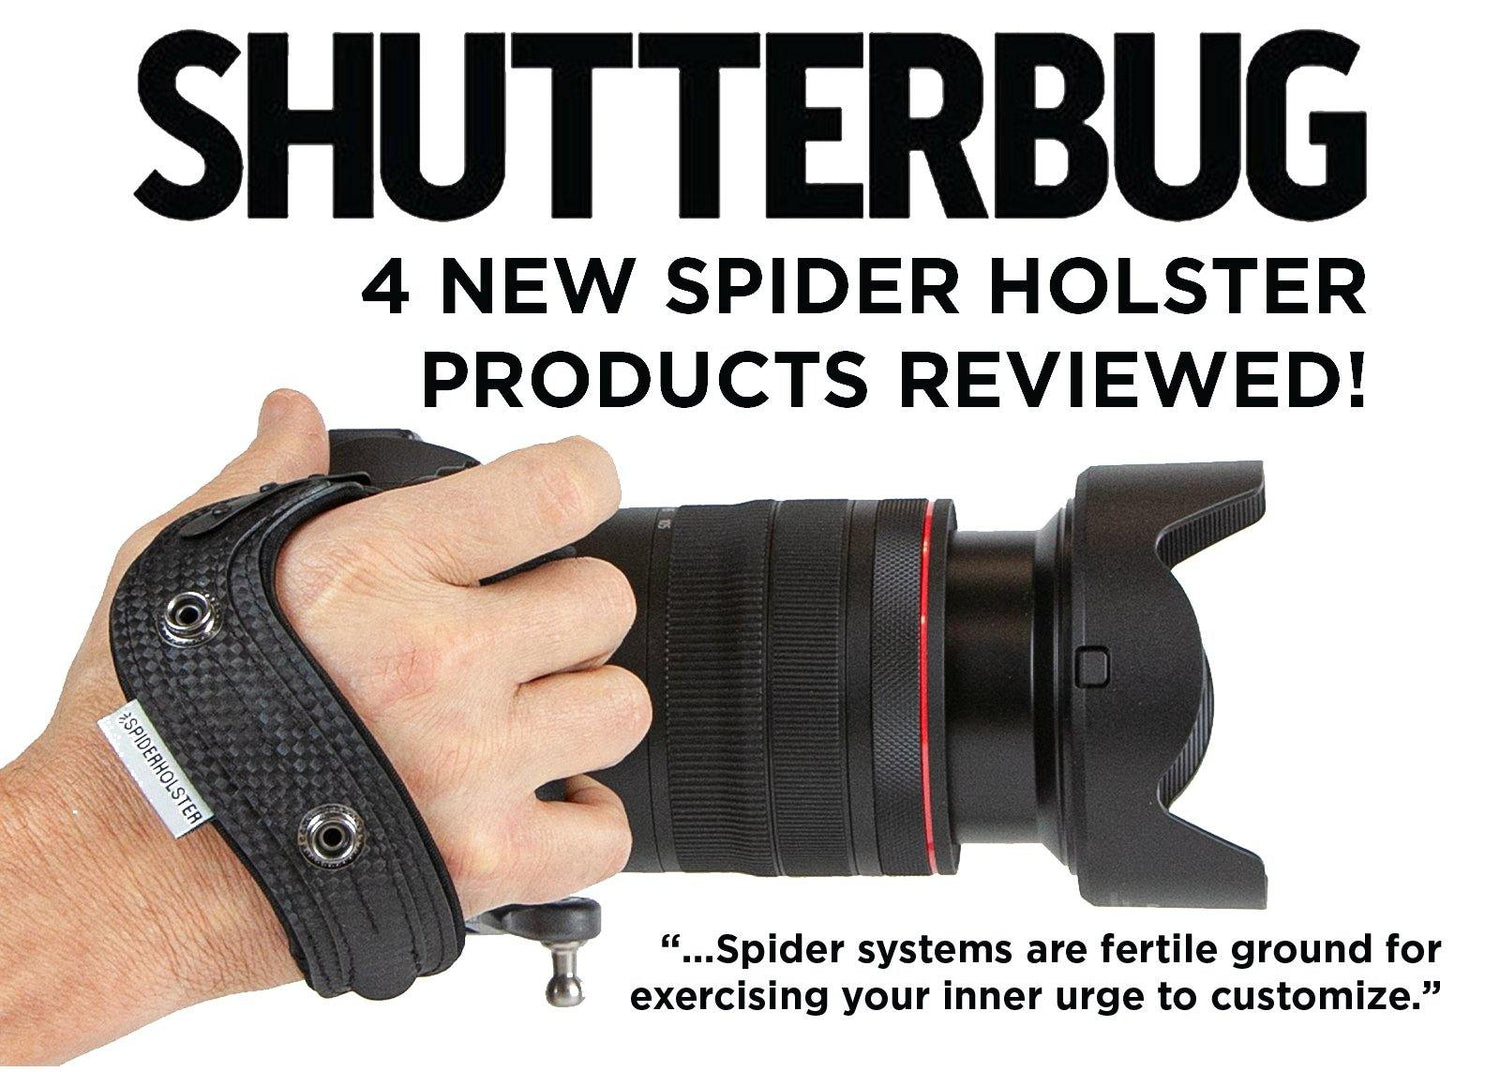 SHUTTERBUG - 4 New Photo Accessories from Spider Holster Reviewed! - Spider Camera Holster